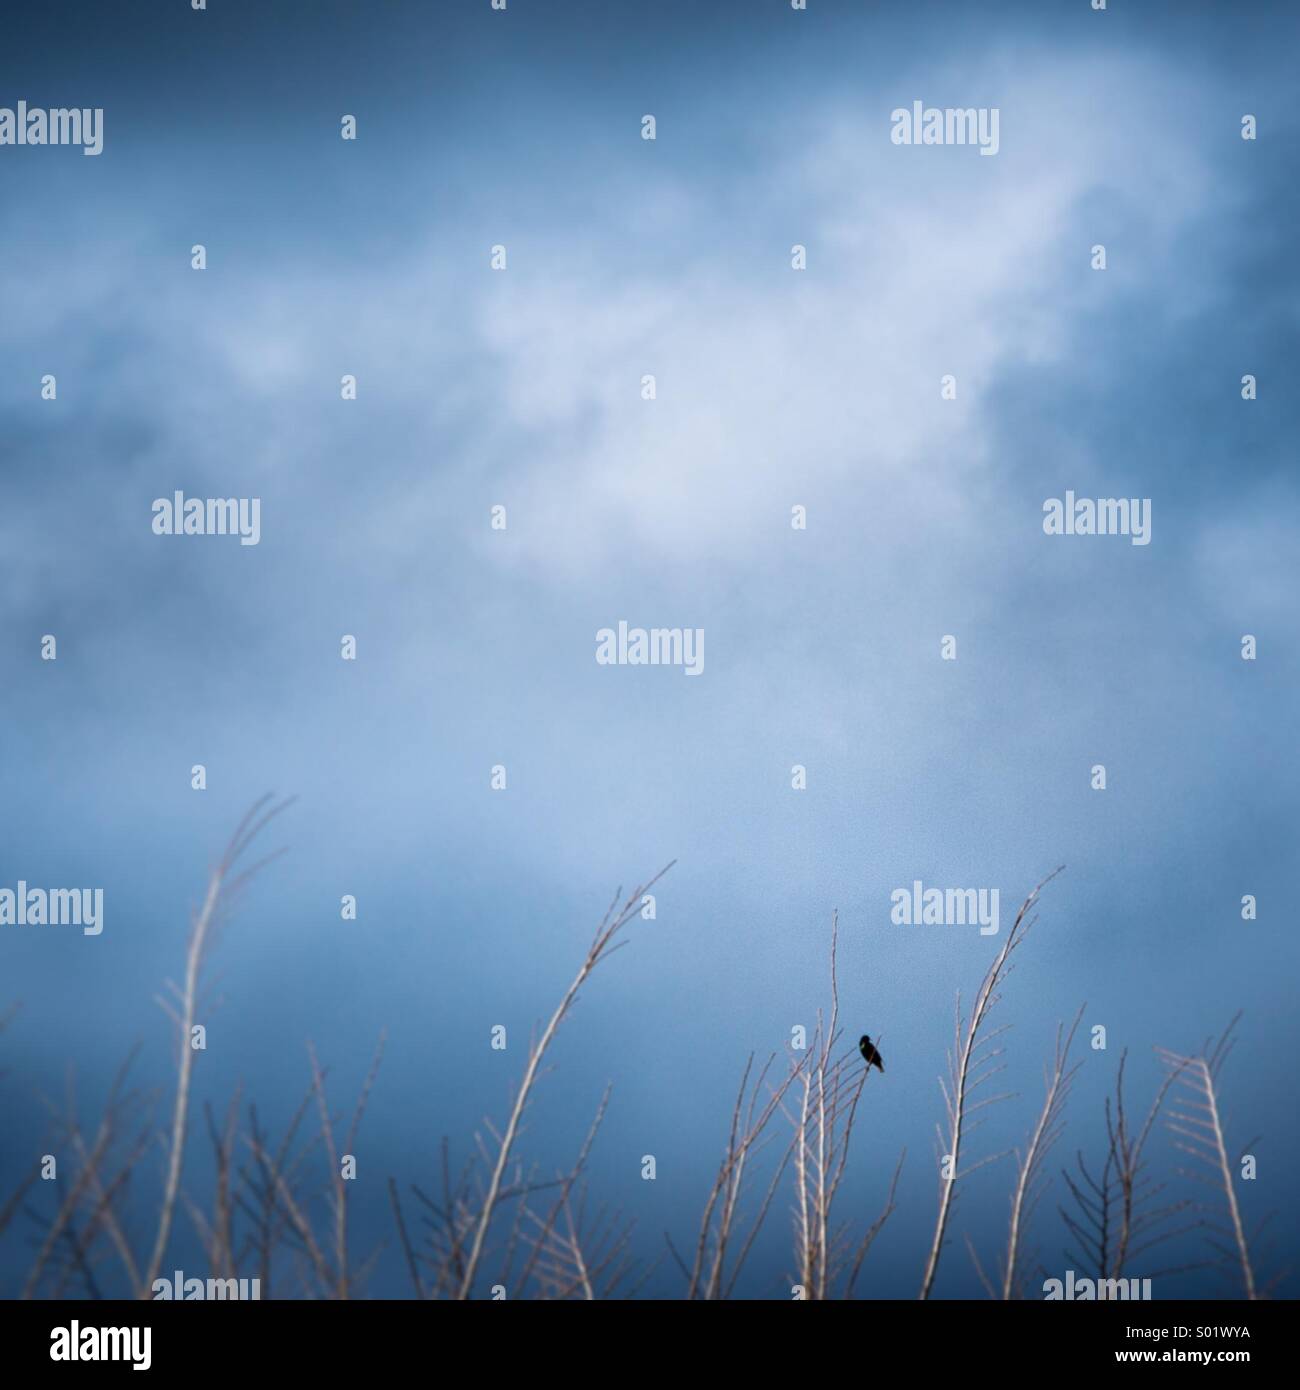 A bird rests on a tree branch under stormy skies. Stock Photo